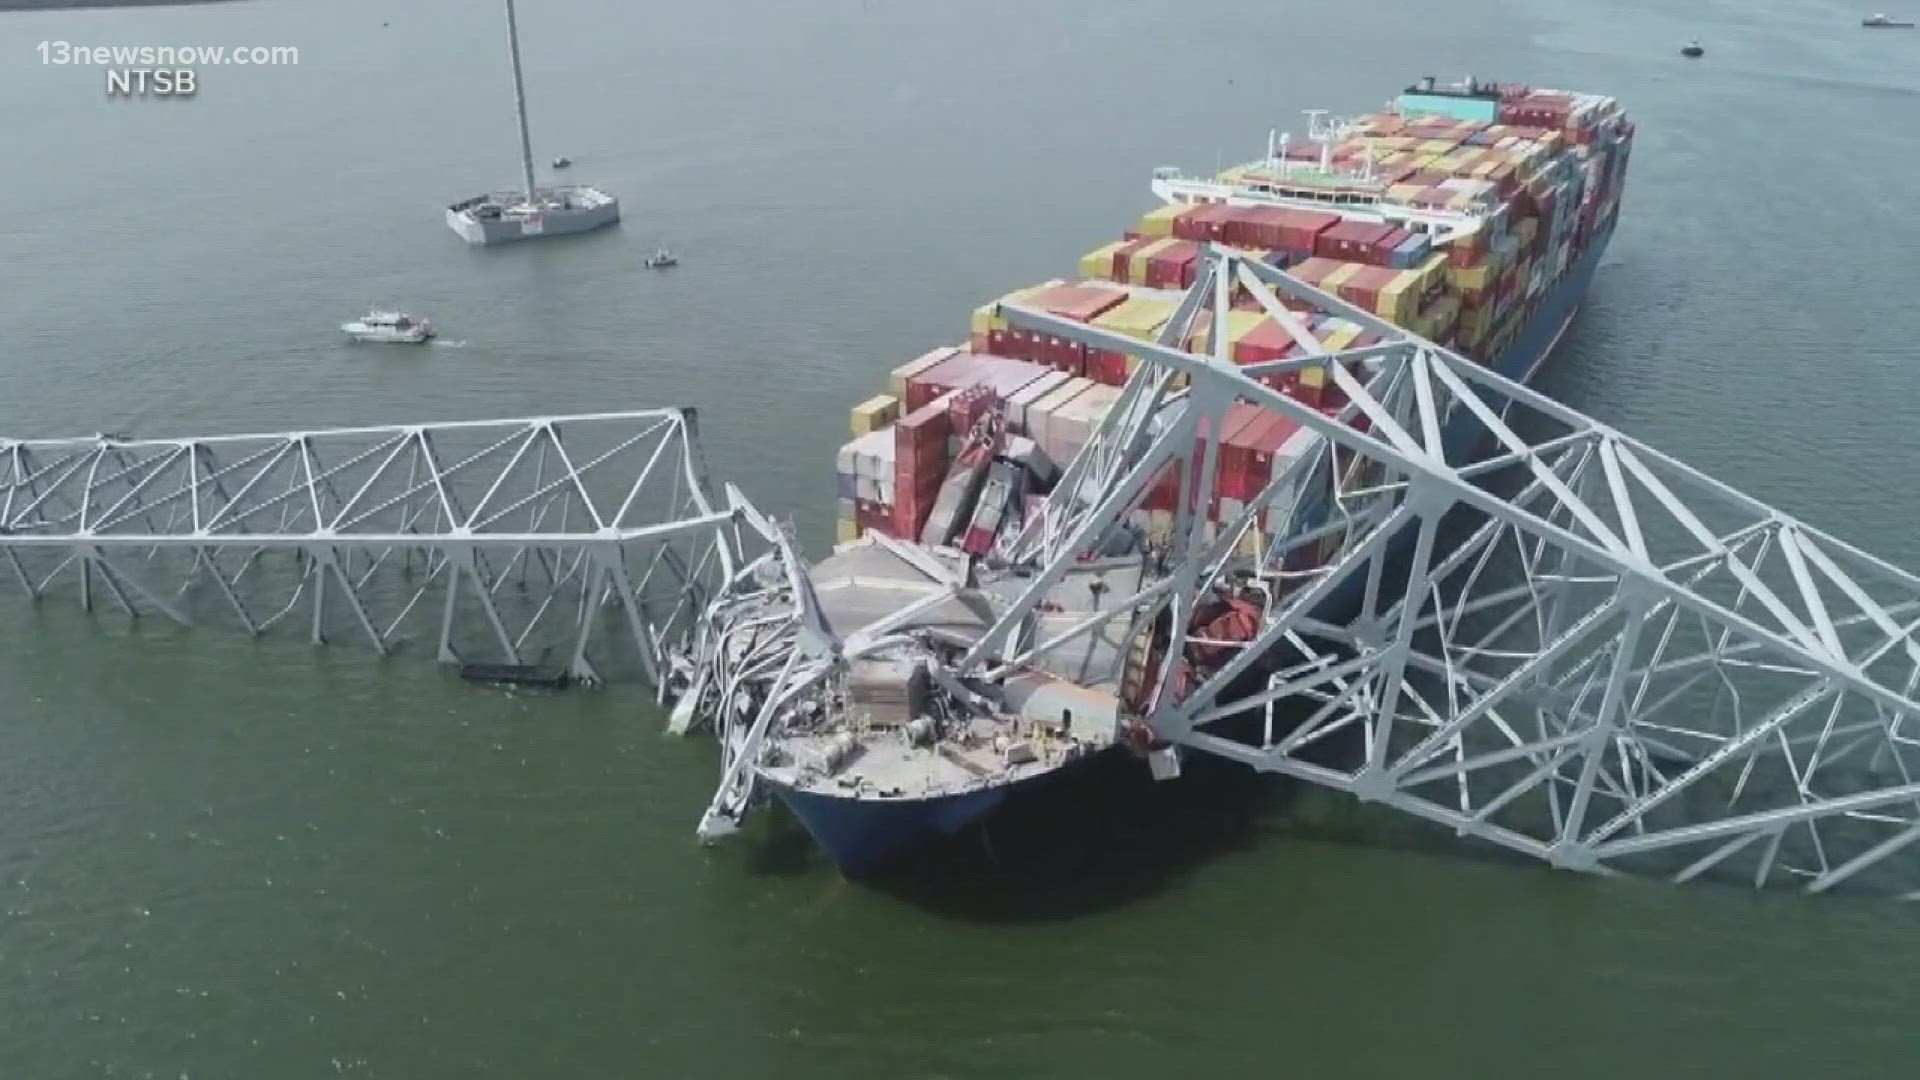 Investigators are aboard the massive container ship that crashed into the Francis Scott Key Bridge in Baltimore, reviewing damage and collecting evidence.